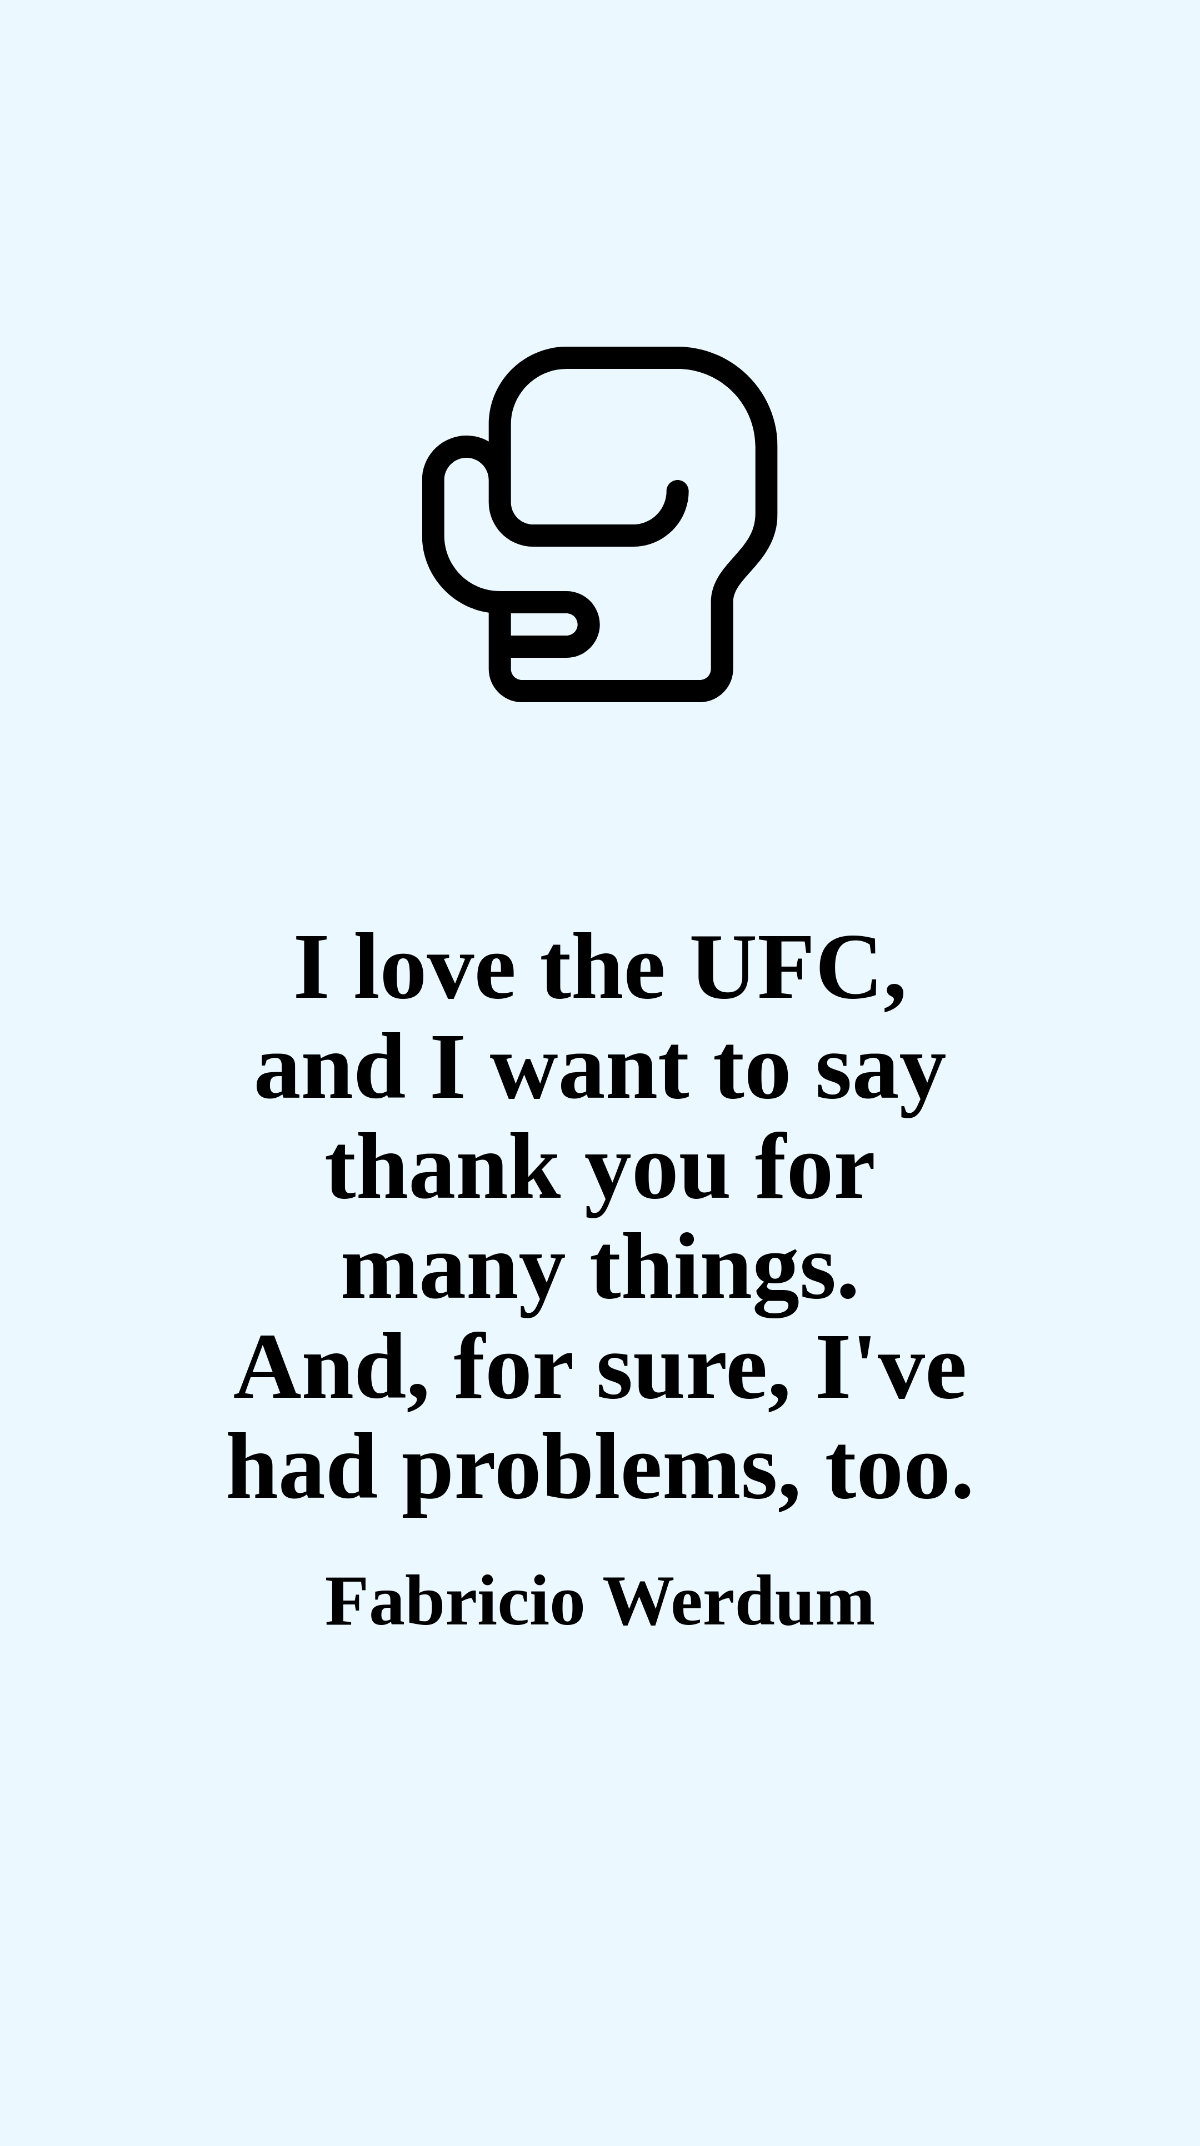 Fabricio Werdum - I love the UFC, and I want to say thank you for many things. And, for sure, I've had problems, too.